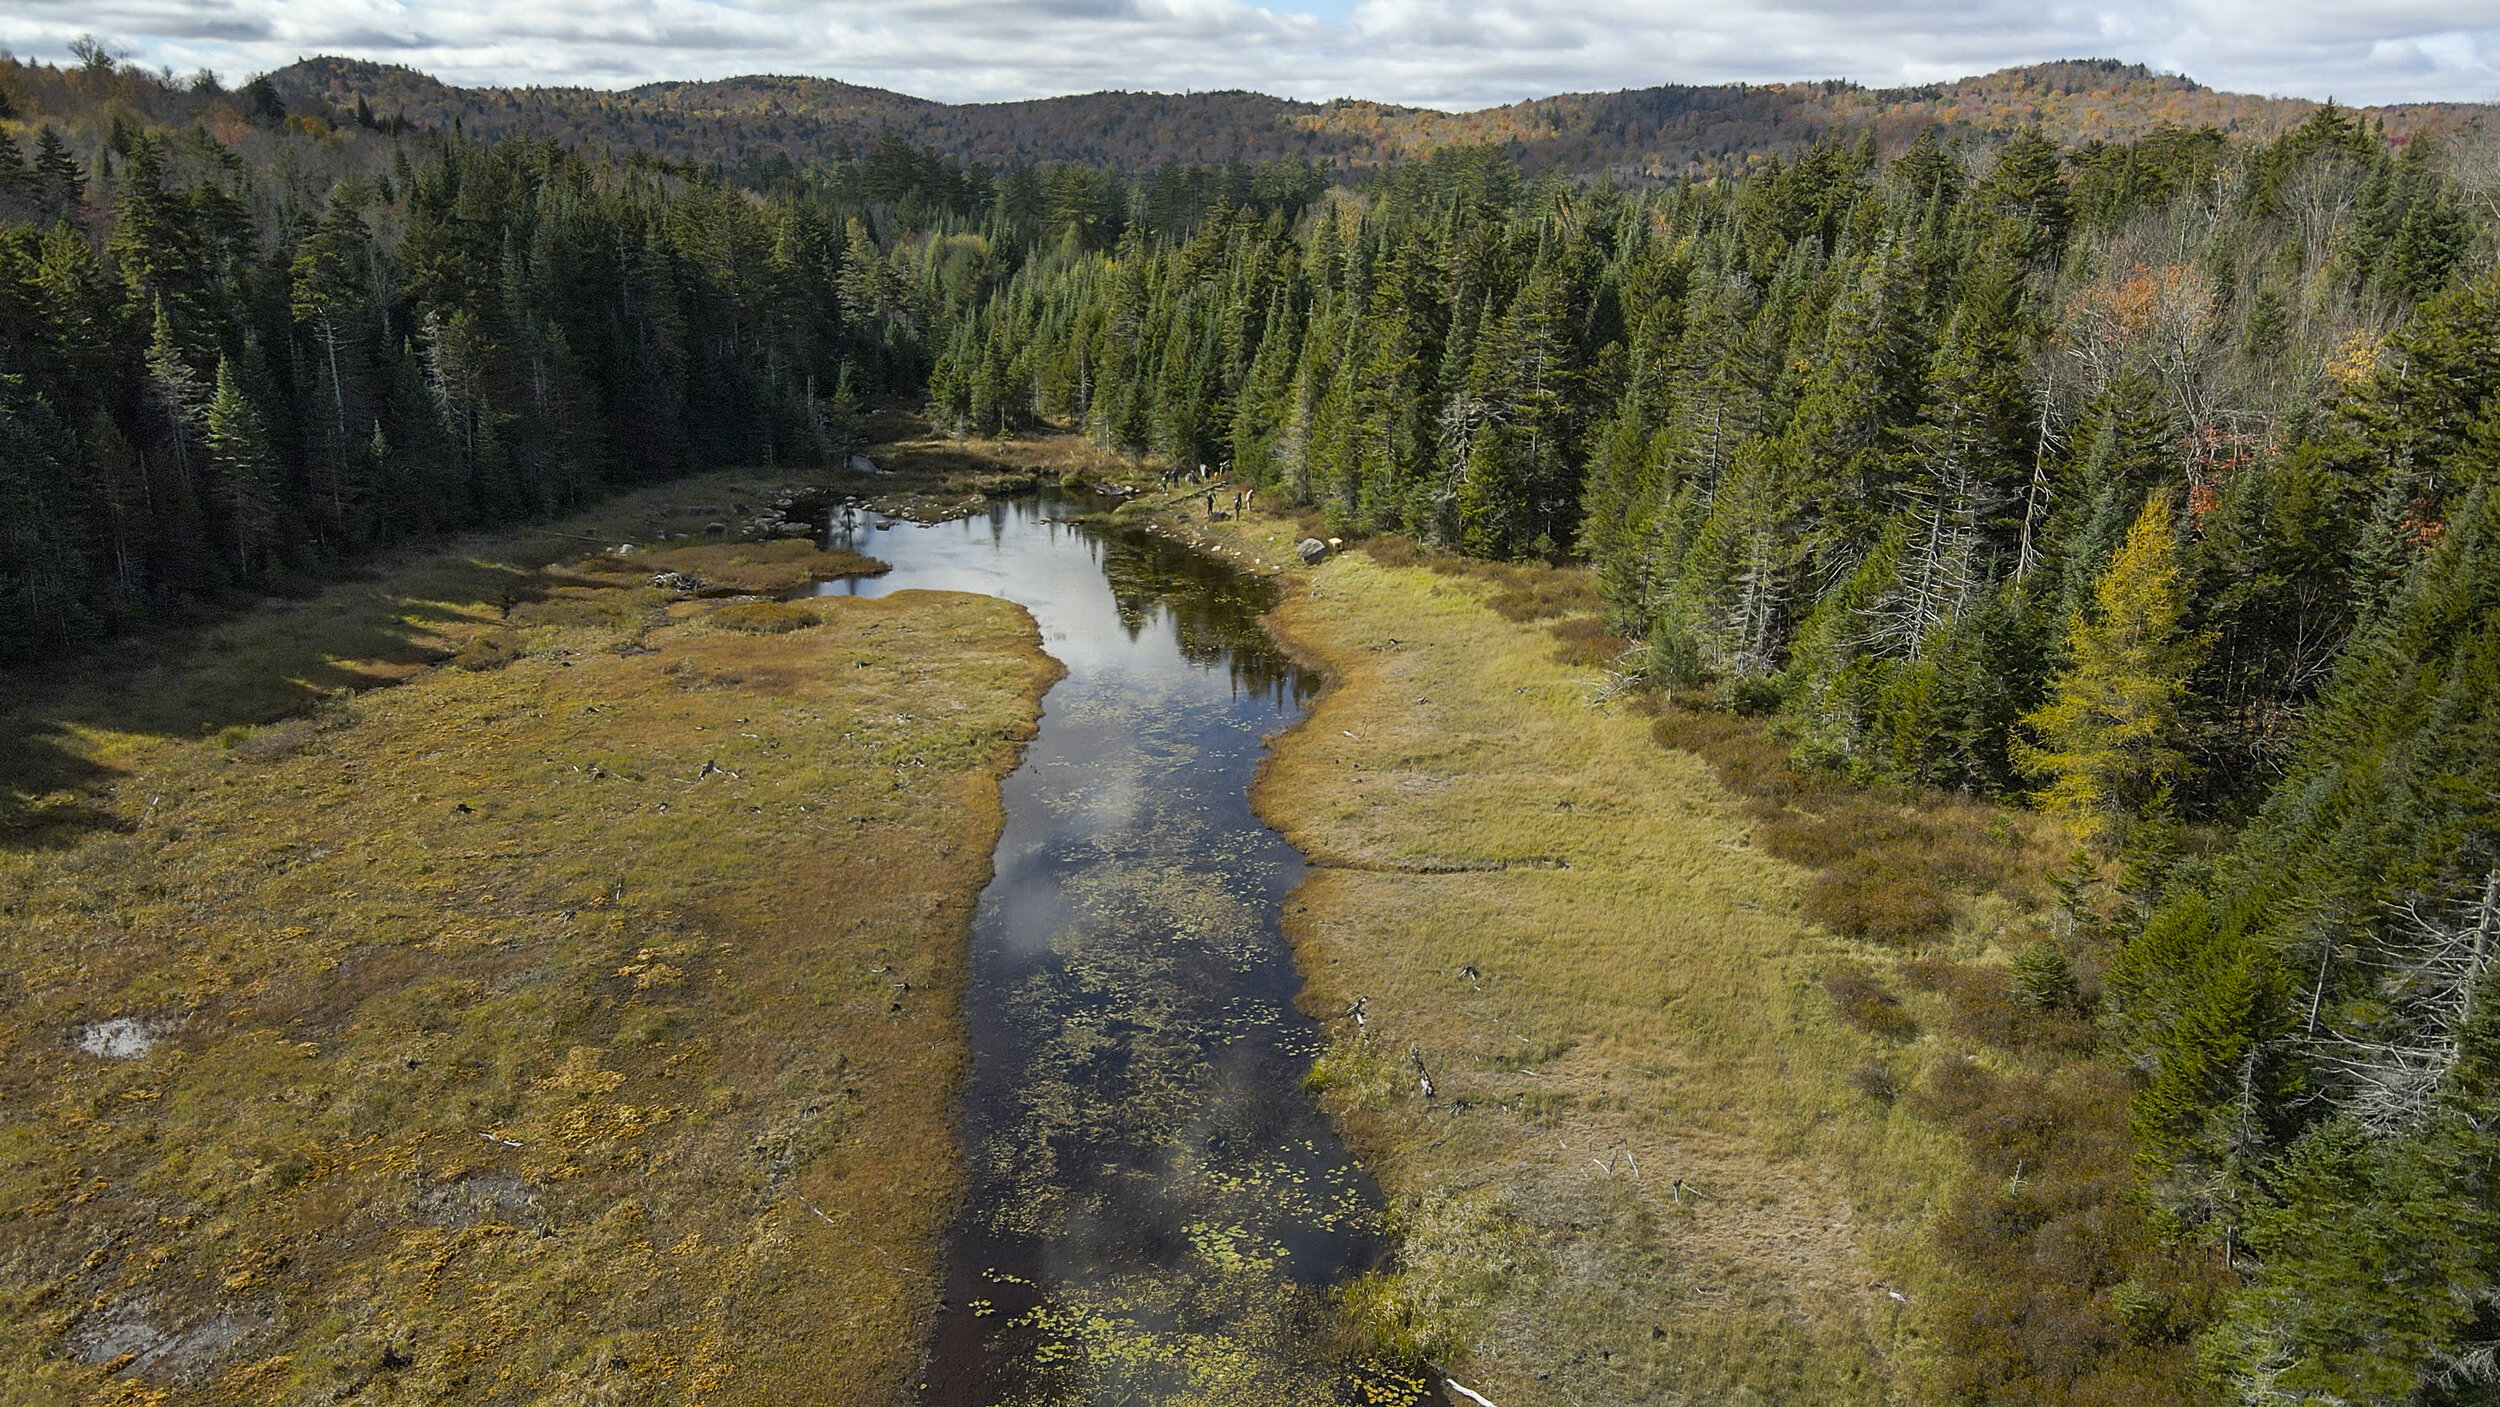  The release site at Shingle Shanty Preserve and Research Station in the west-central Adirondacks. Photo courtesy of The Wild Center. 